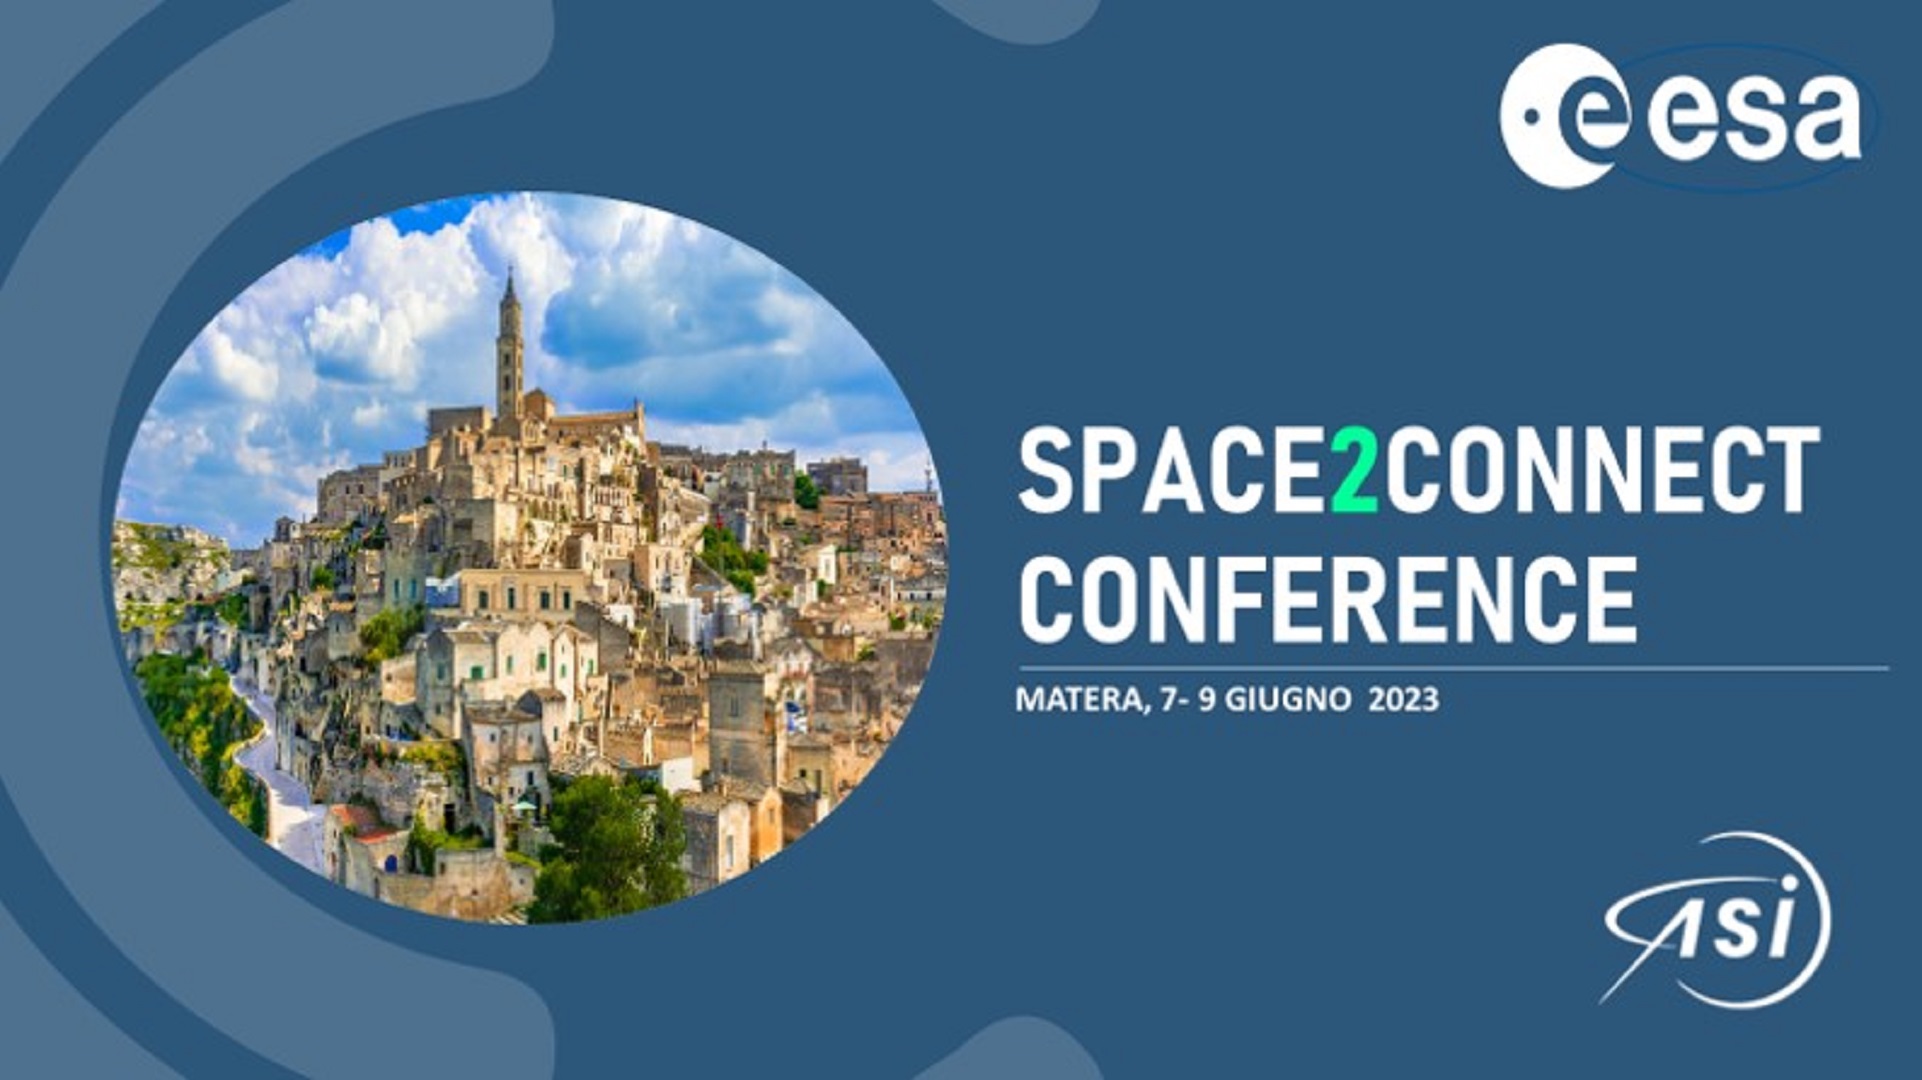 ESA Space2Connect Conference 2023 – Matera